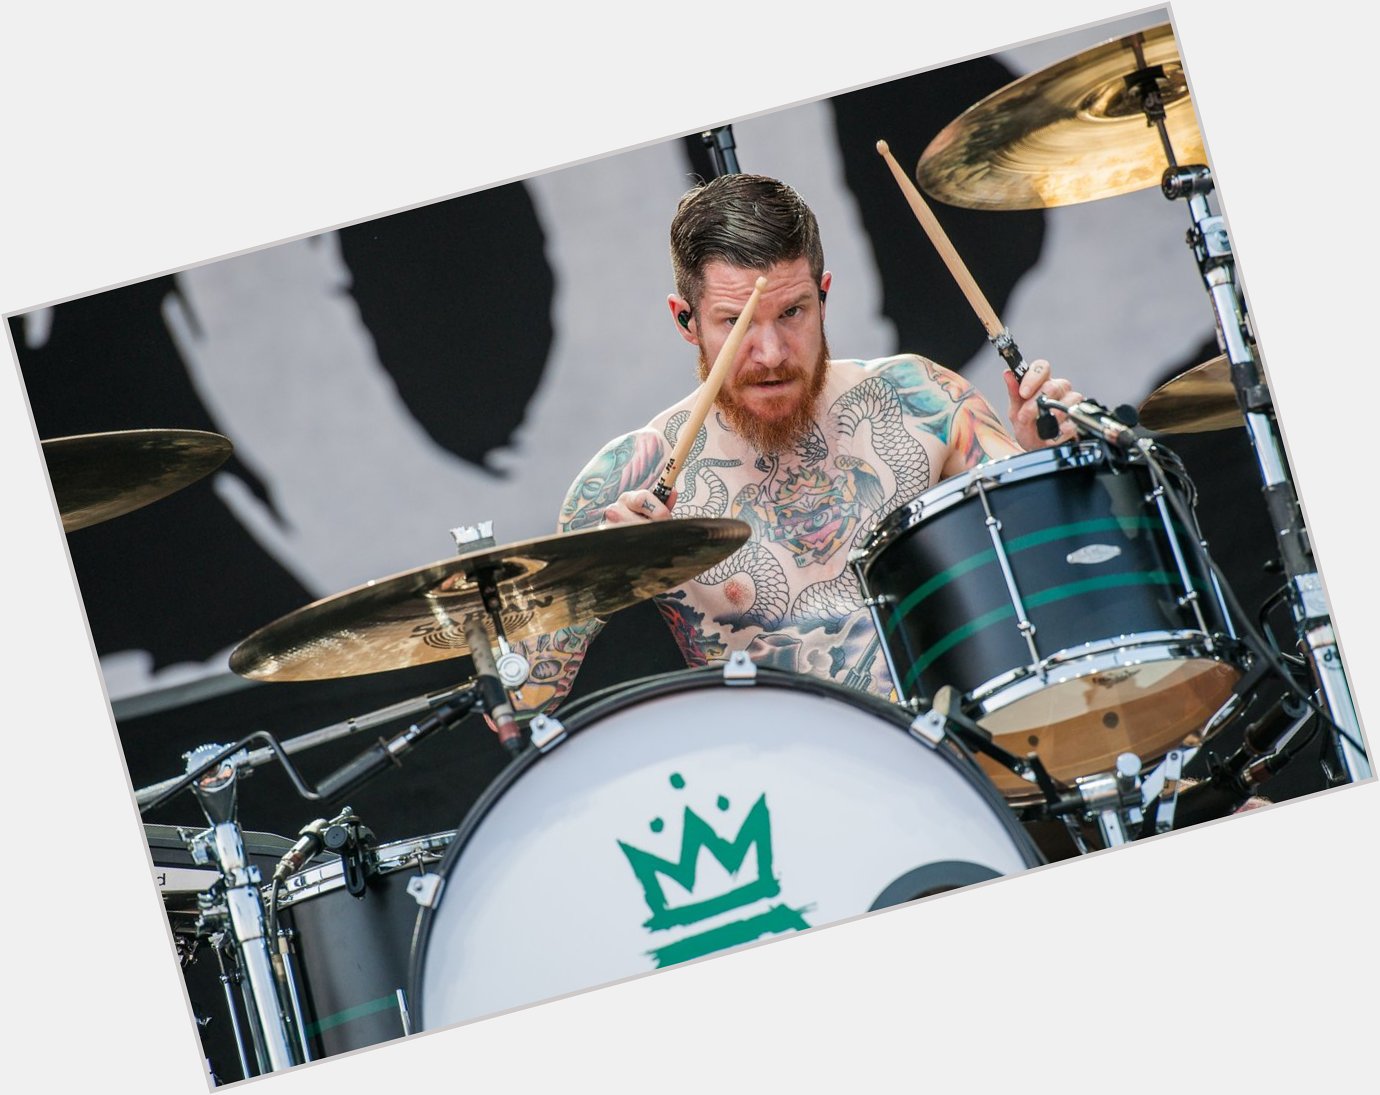 Happy Birthday to ANDY HURLEY American drummer who turns 40 today, May 31, 2020.  